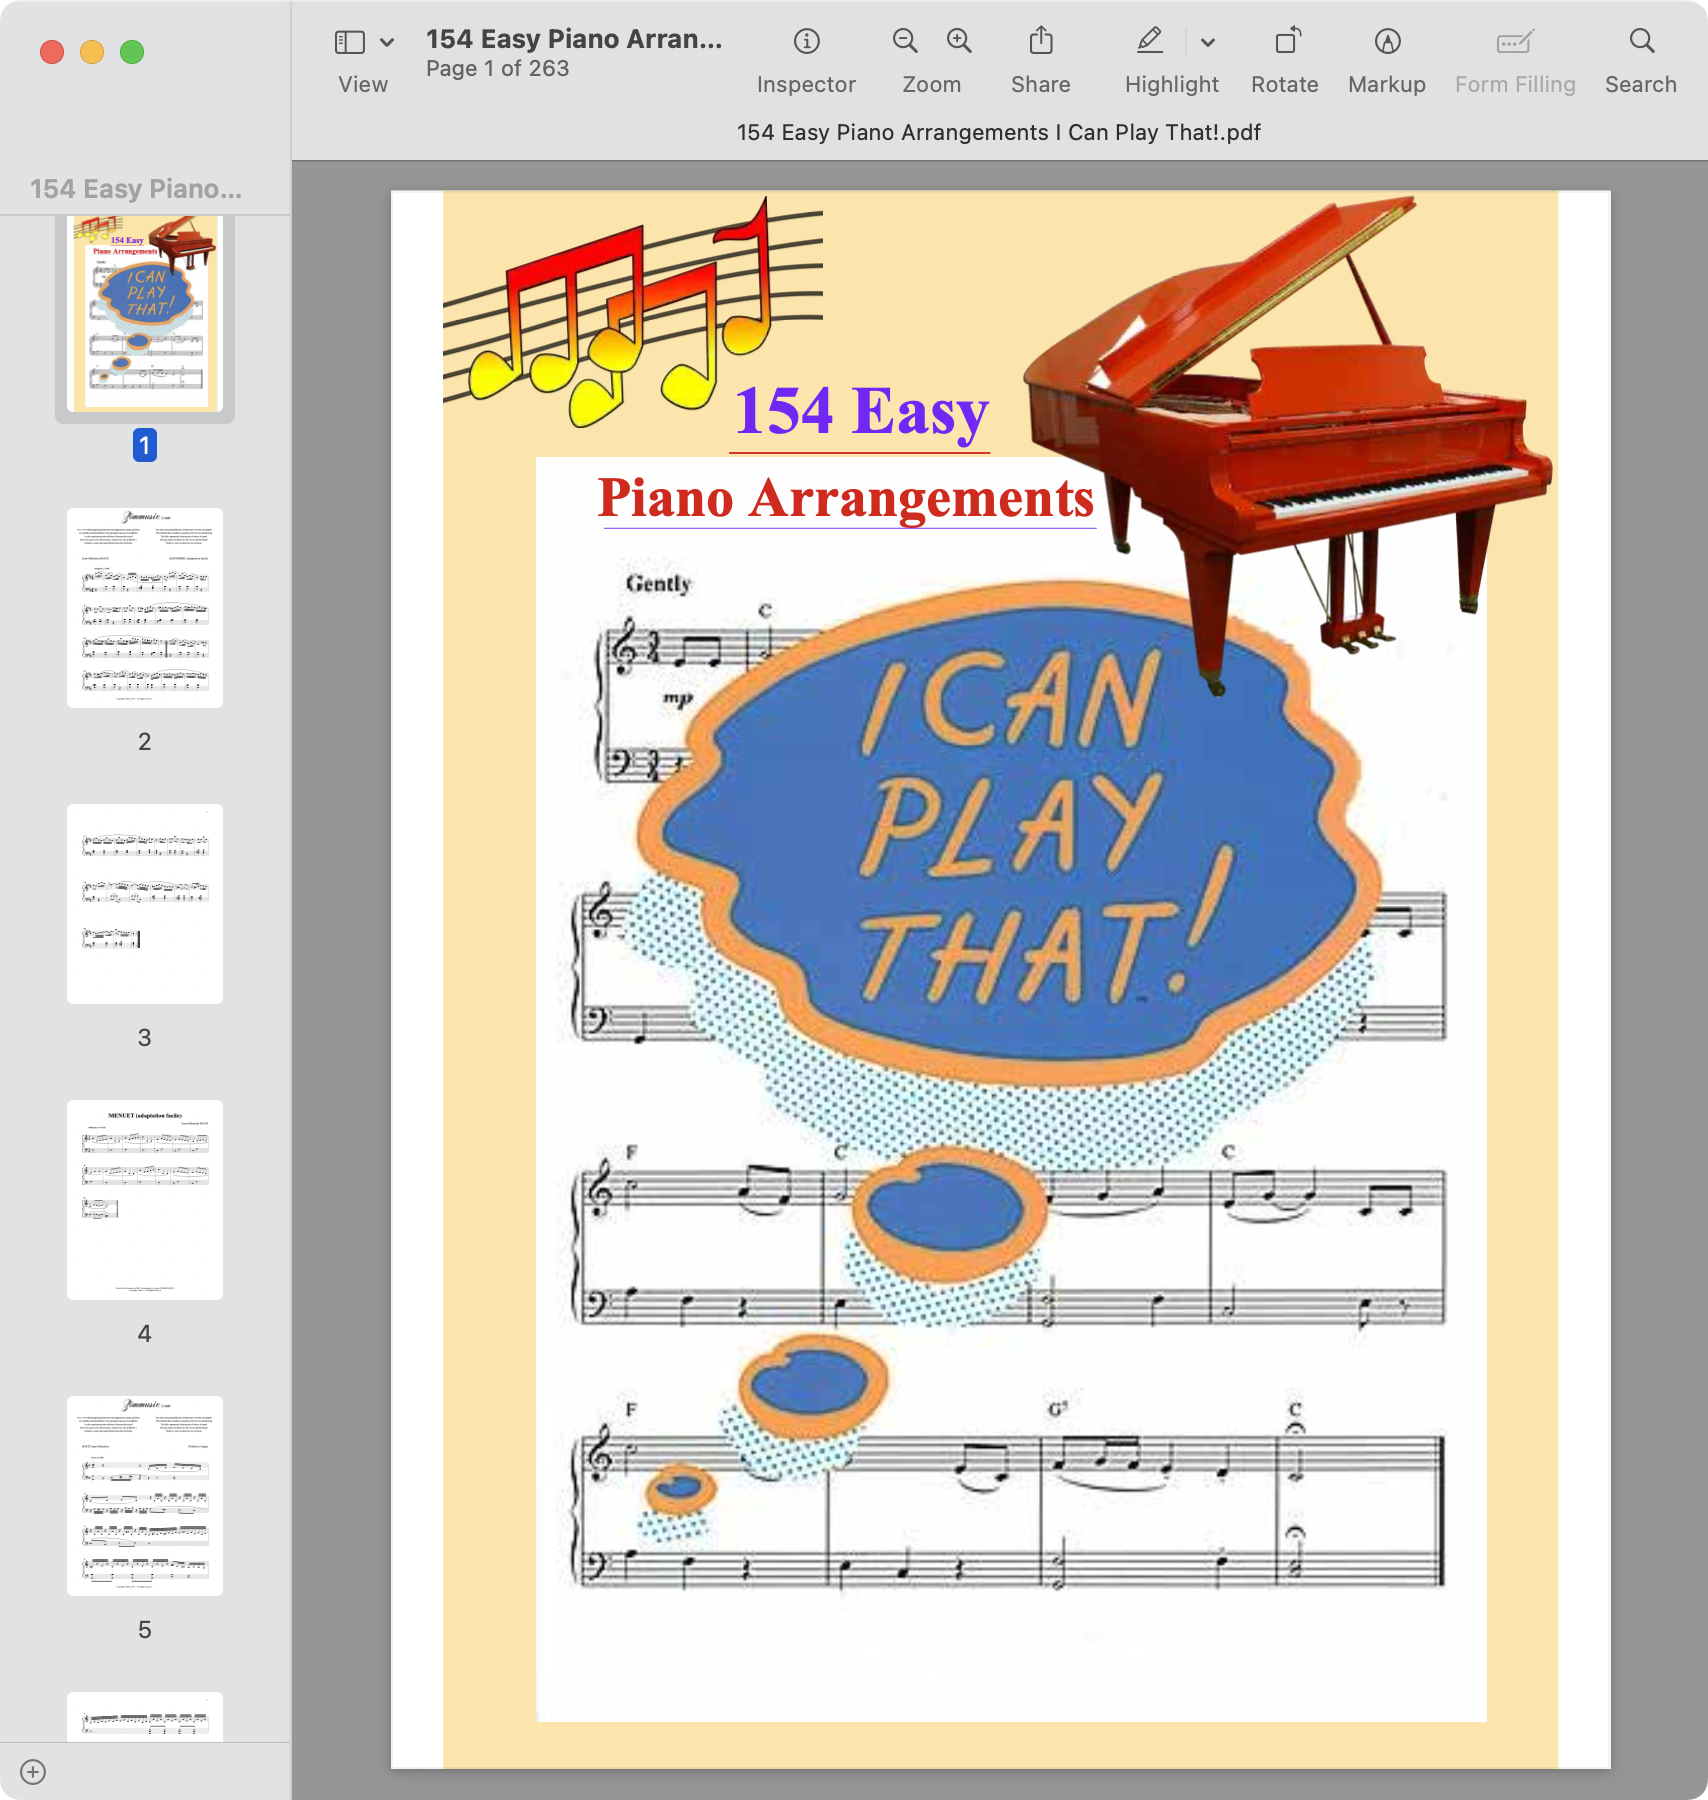 154 Easy Piano Arrangements I Can Play That!.jpg